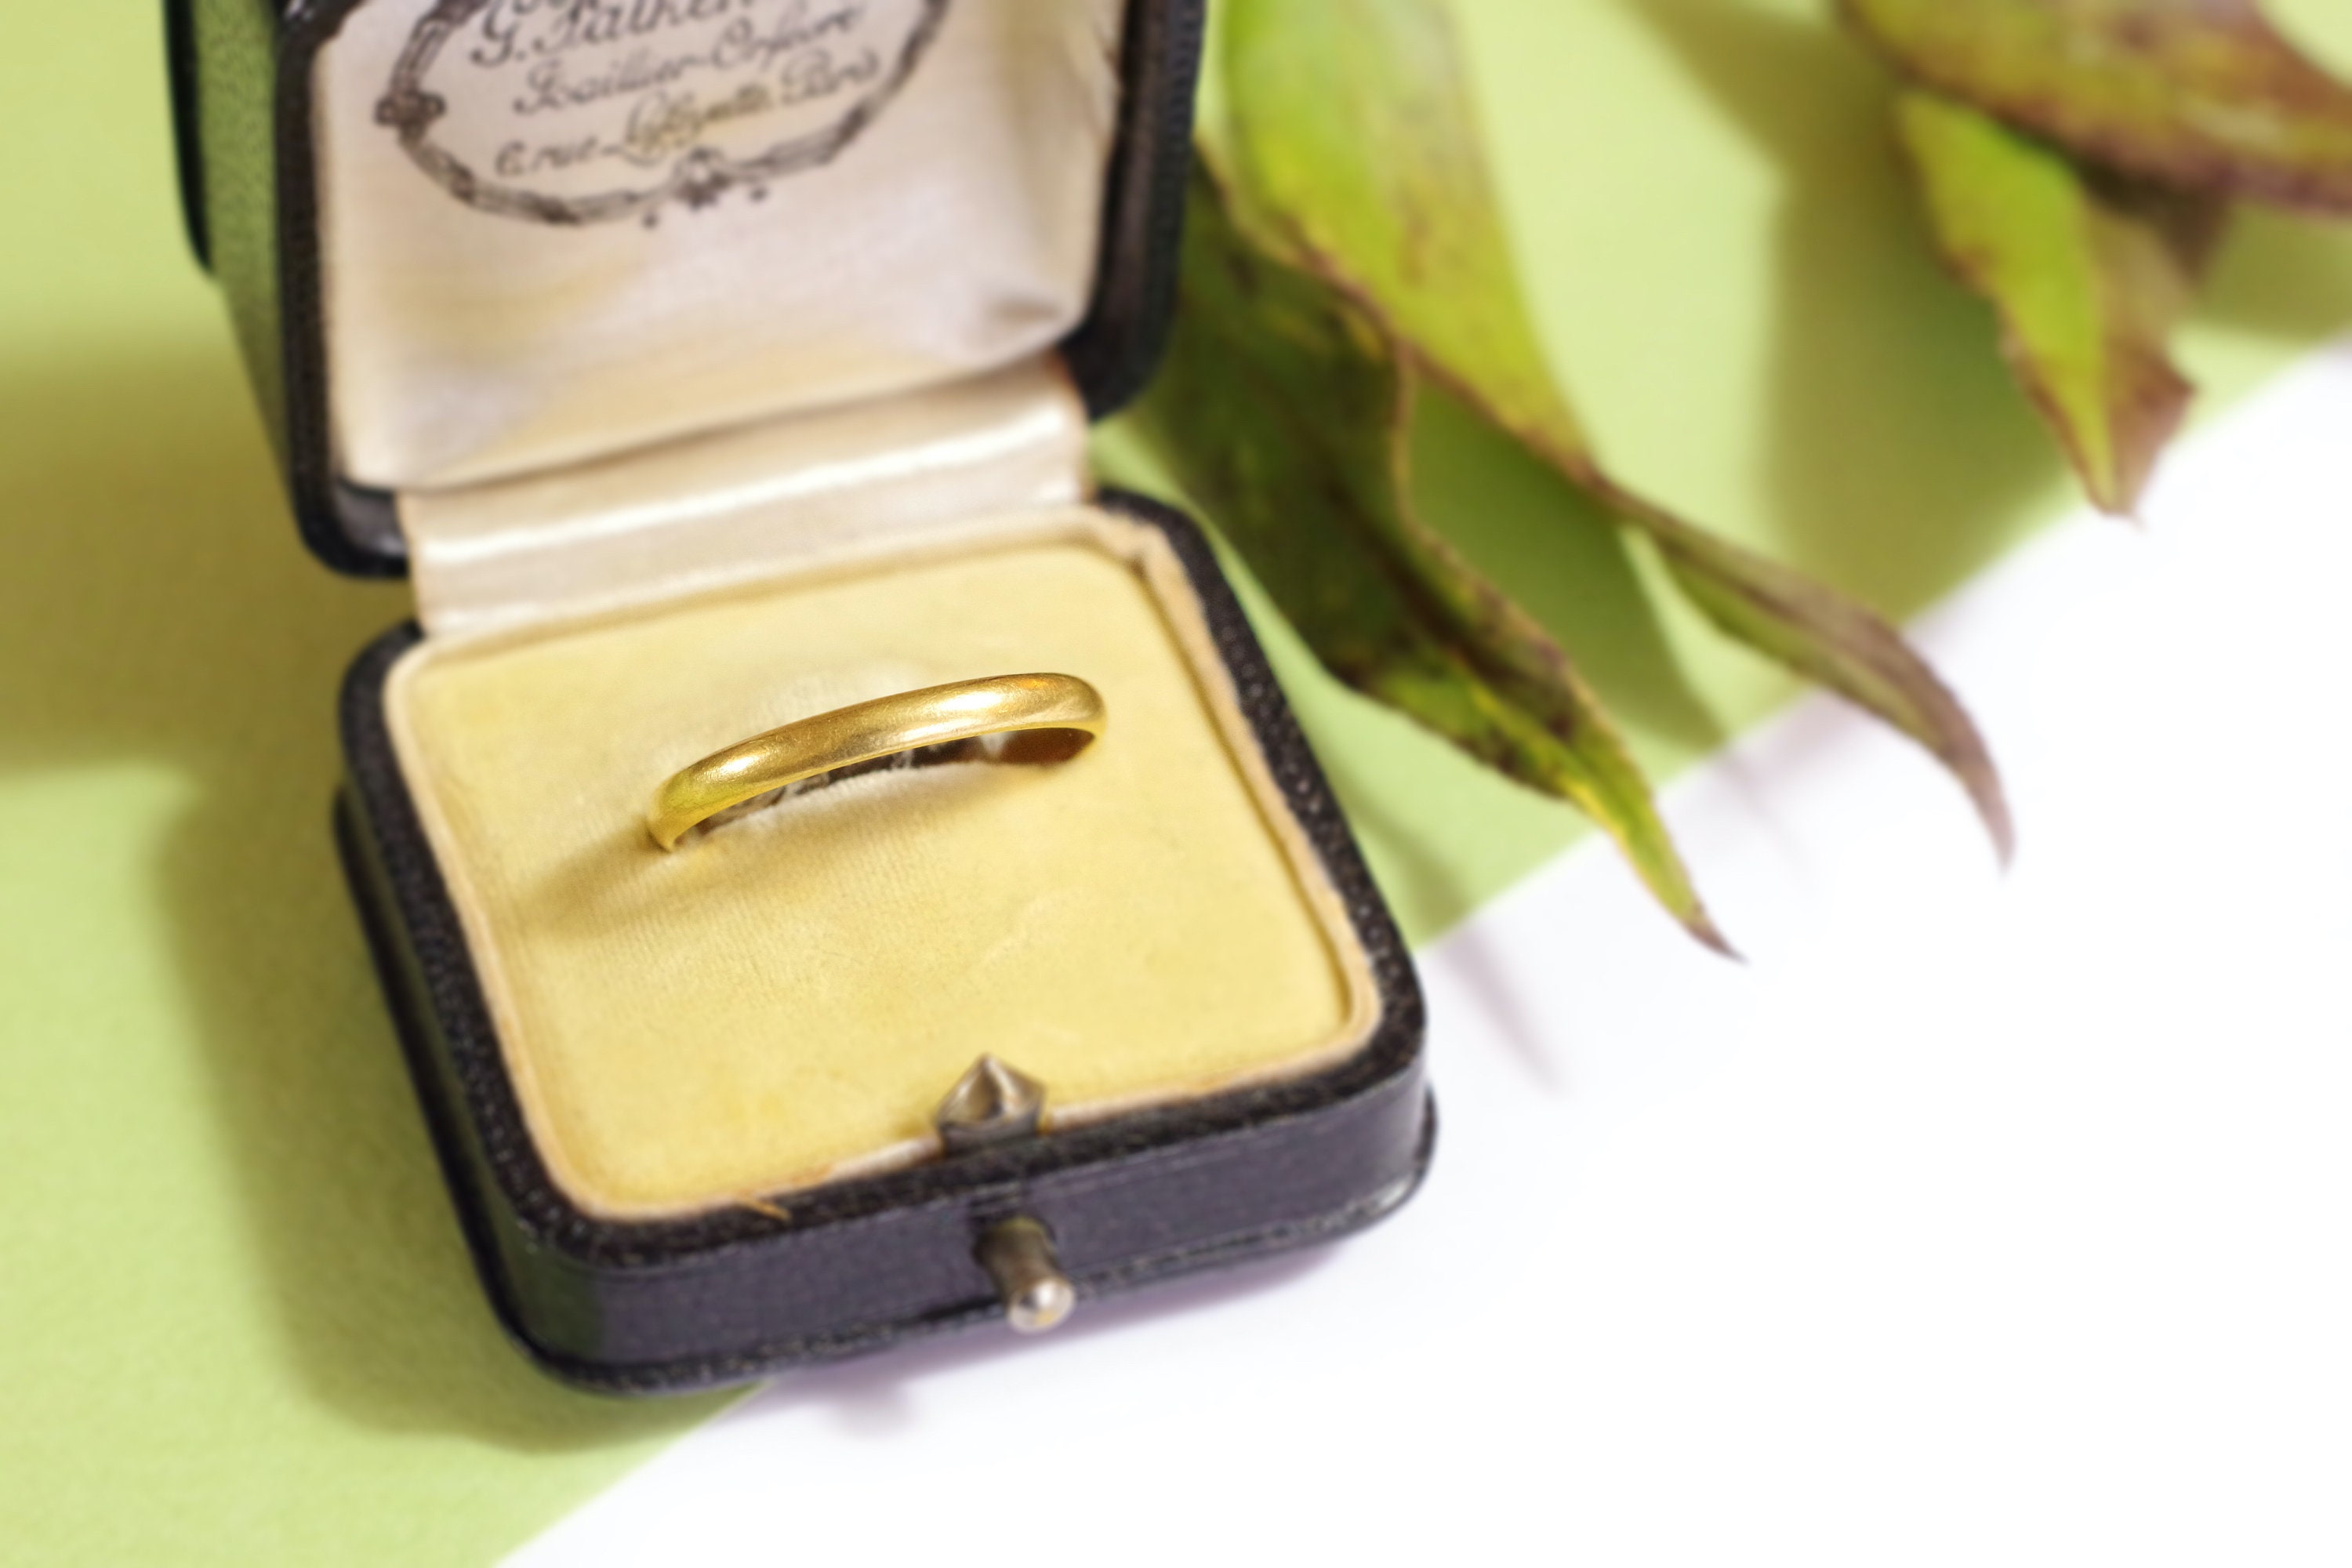 Preowned Gold Ring - Etsy